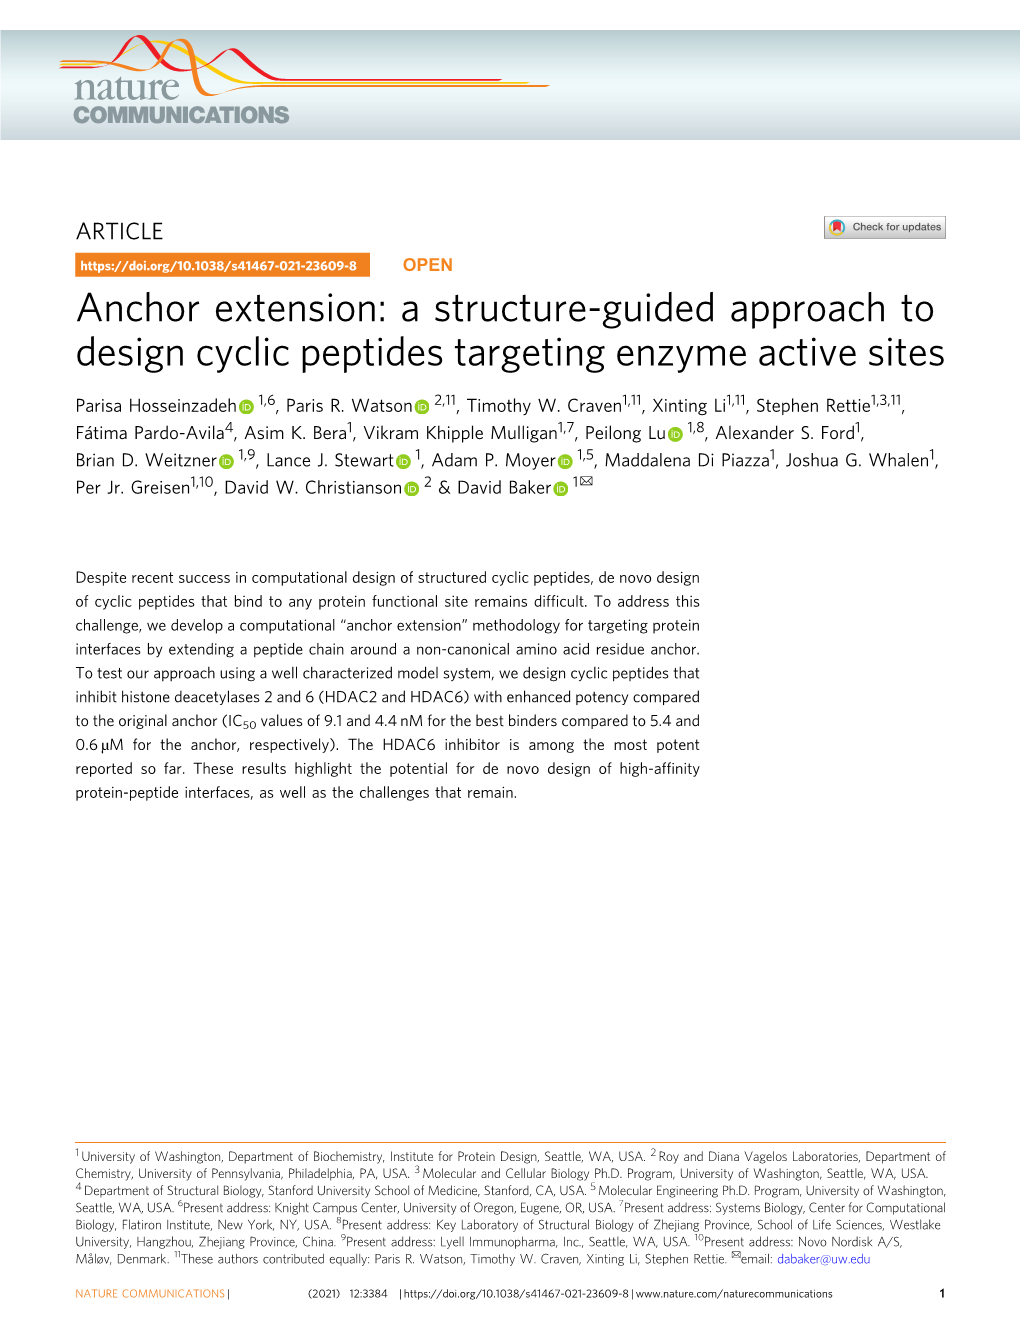 Anchor Extension: a Structure-Guided Approach to Design Cyclic Peptides Targeting Enzyme Active Sites